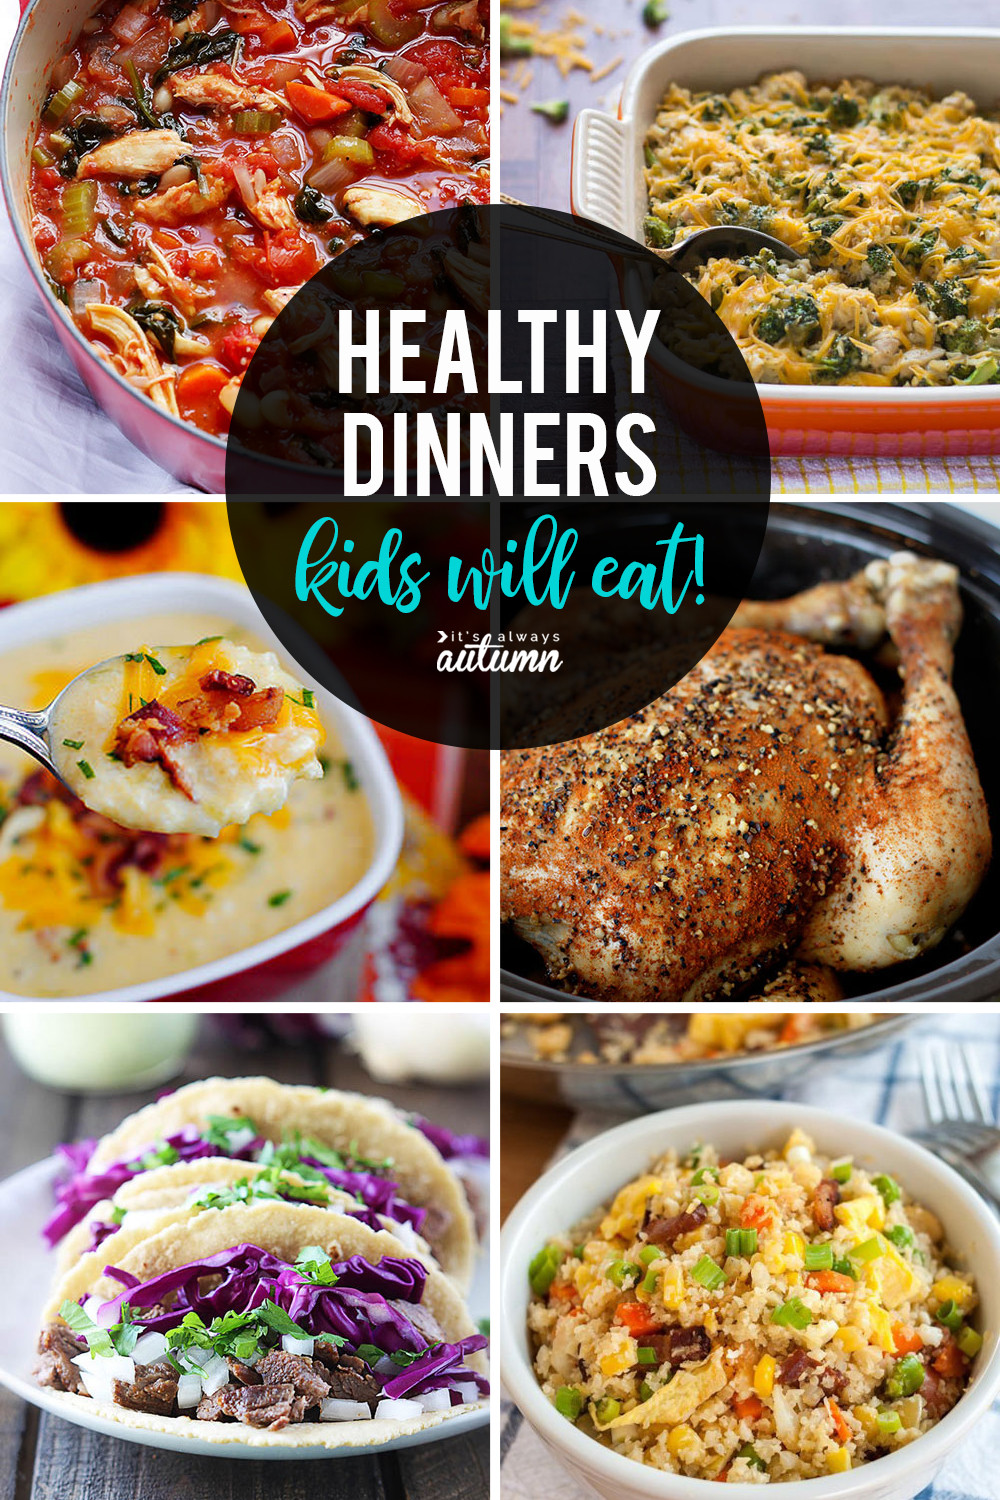 Recipe Ideas For Kids
 20 healthy easy recipes your kids will actually want to